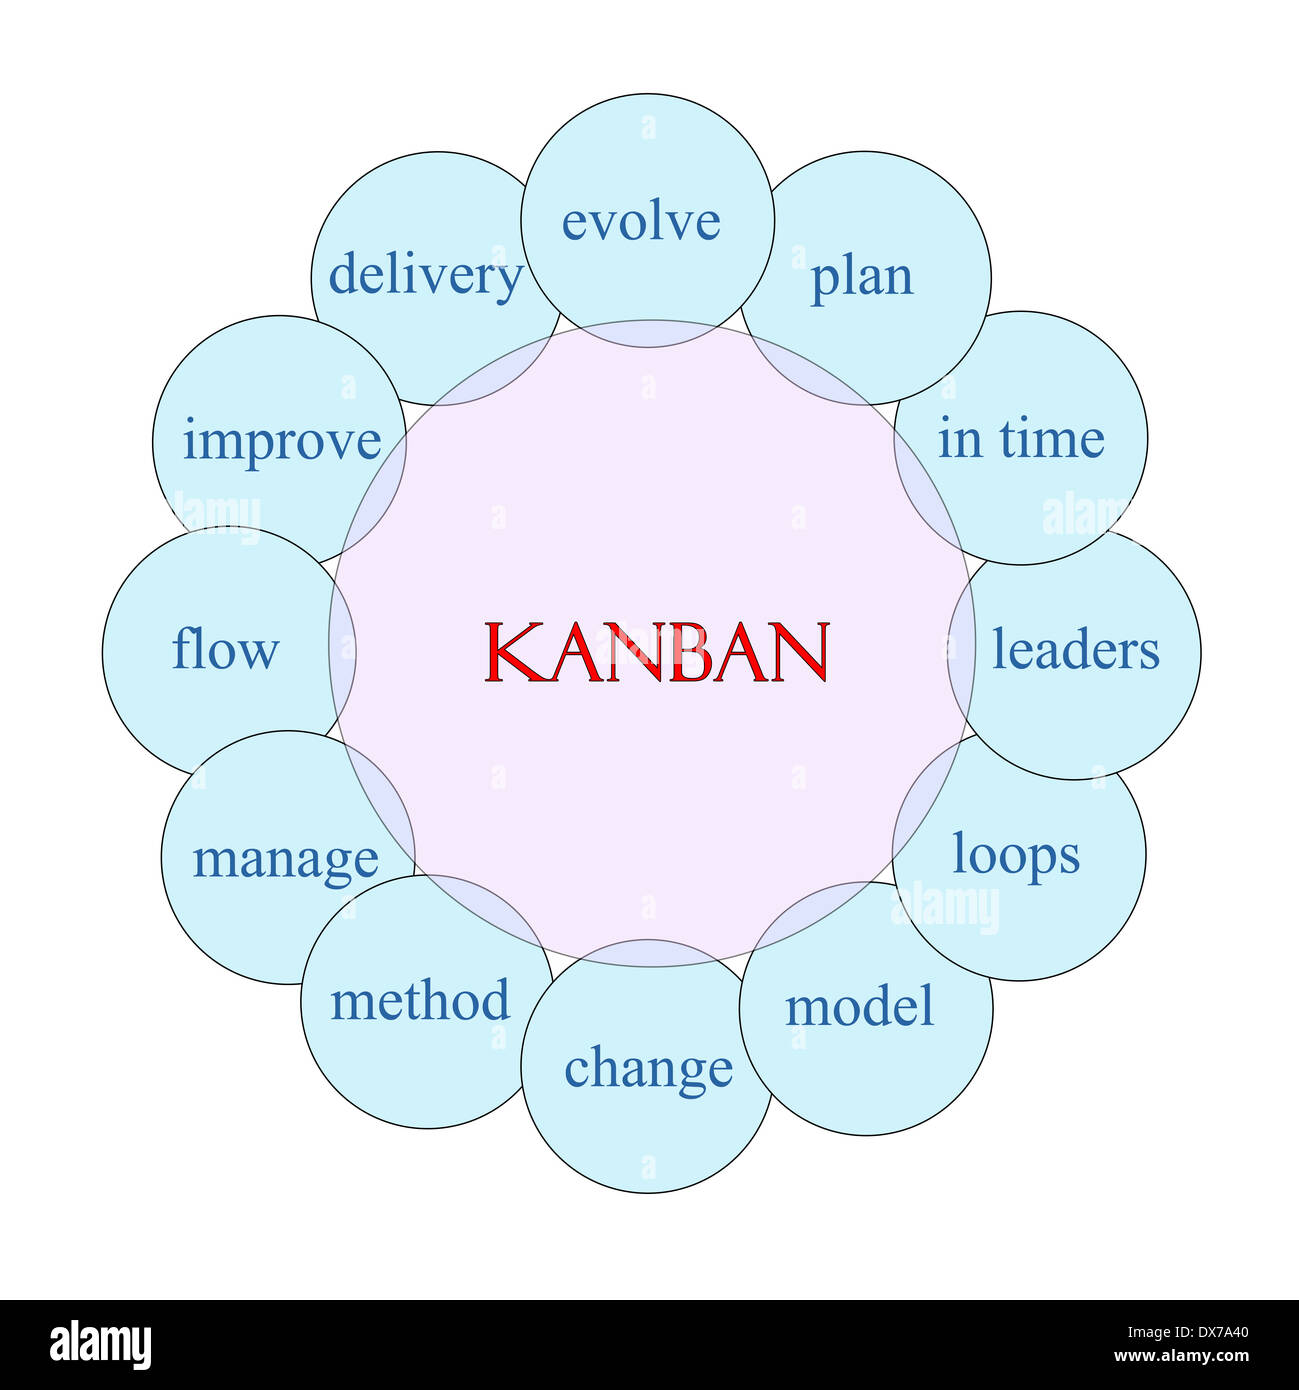 Kanban concept circular diagram in pink and blue with great terms such as plan, loops, leaders and more. Stock Photo